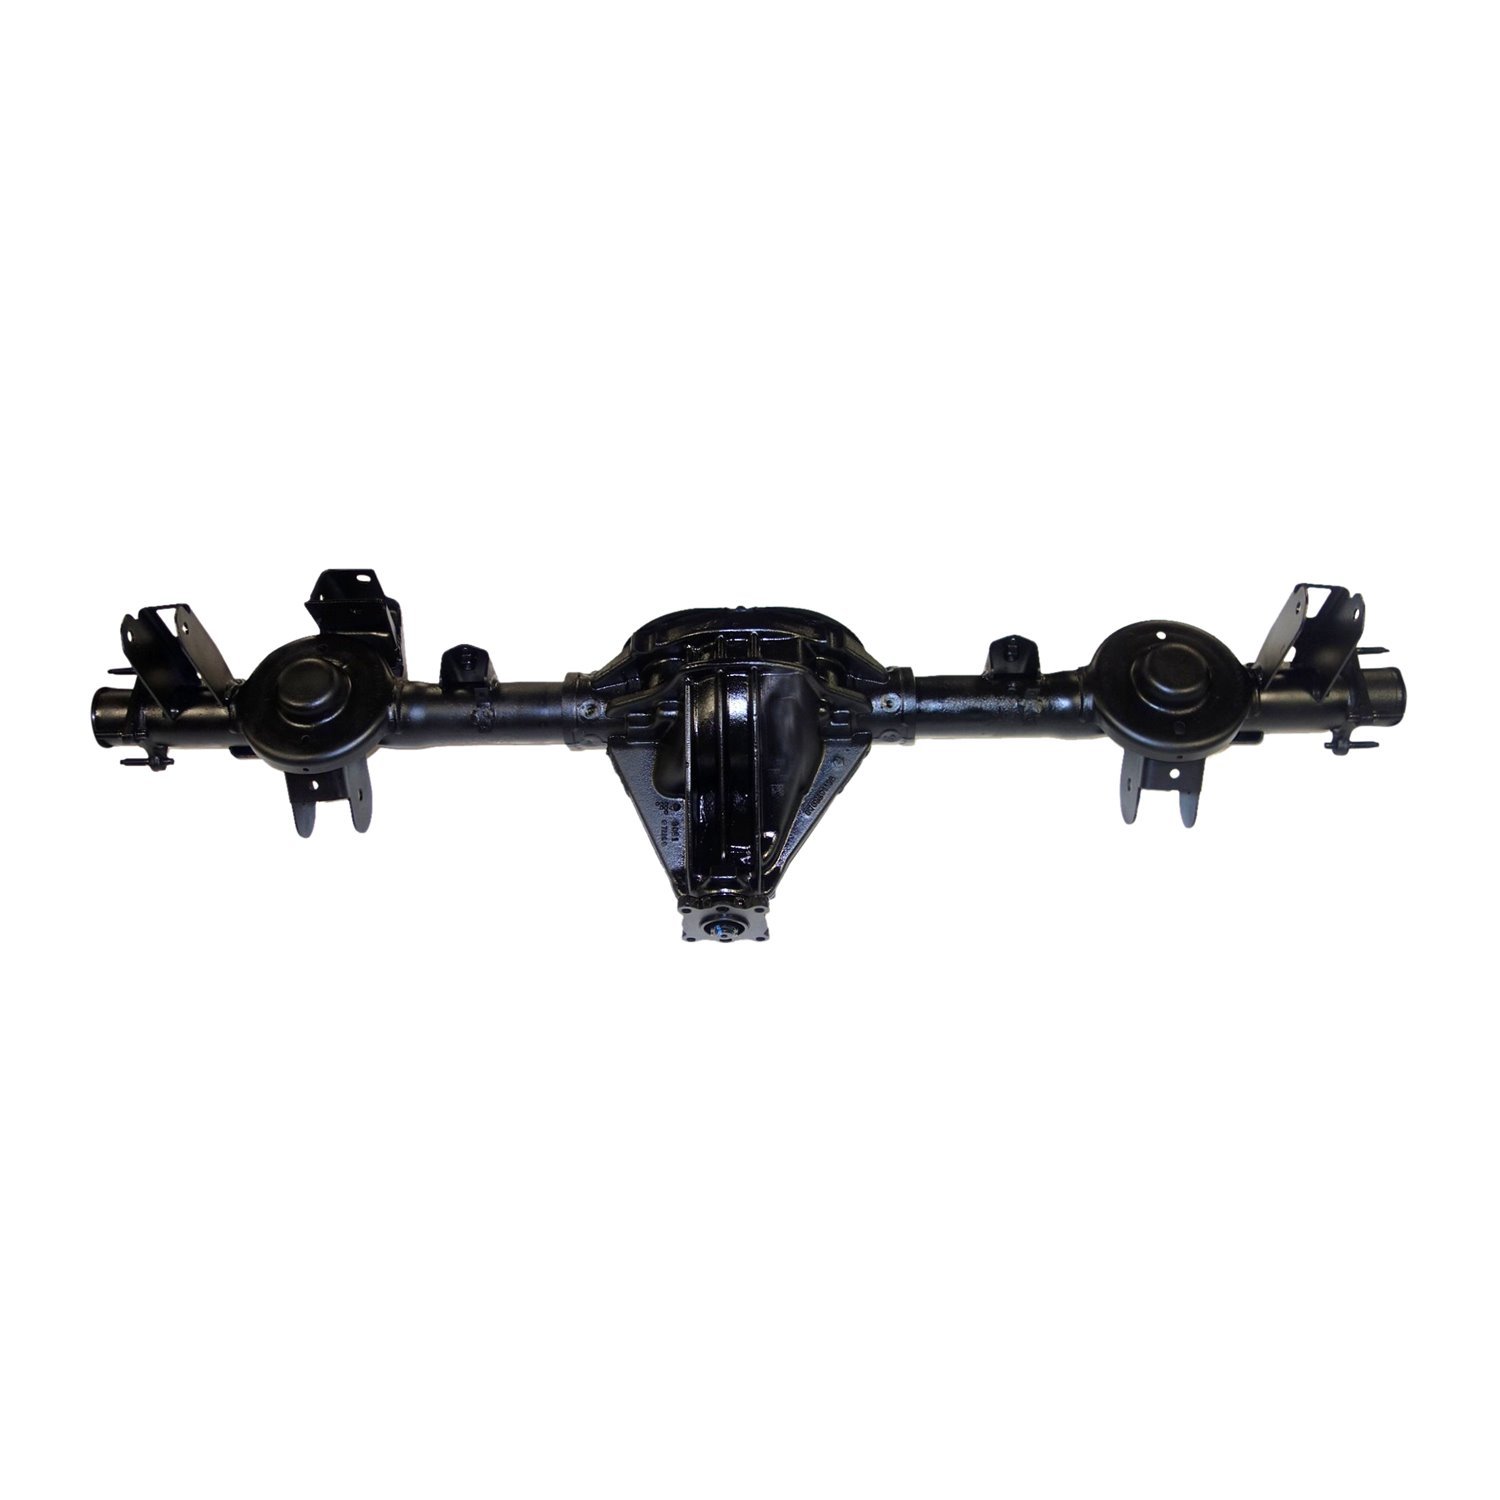 Remanufactured Complete Axle Assembly for Chy 8.25" 07-10 Comm&er, Grand Cherokee 3.73